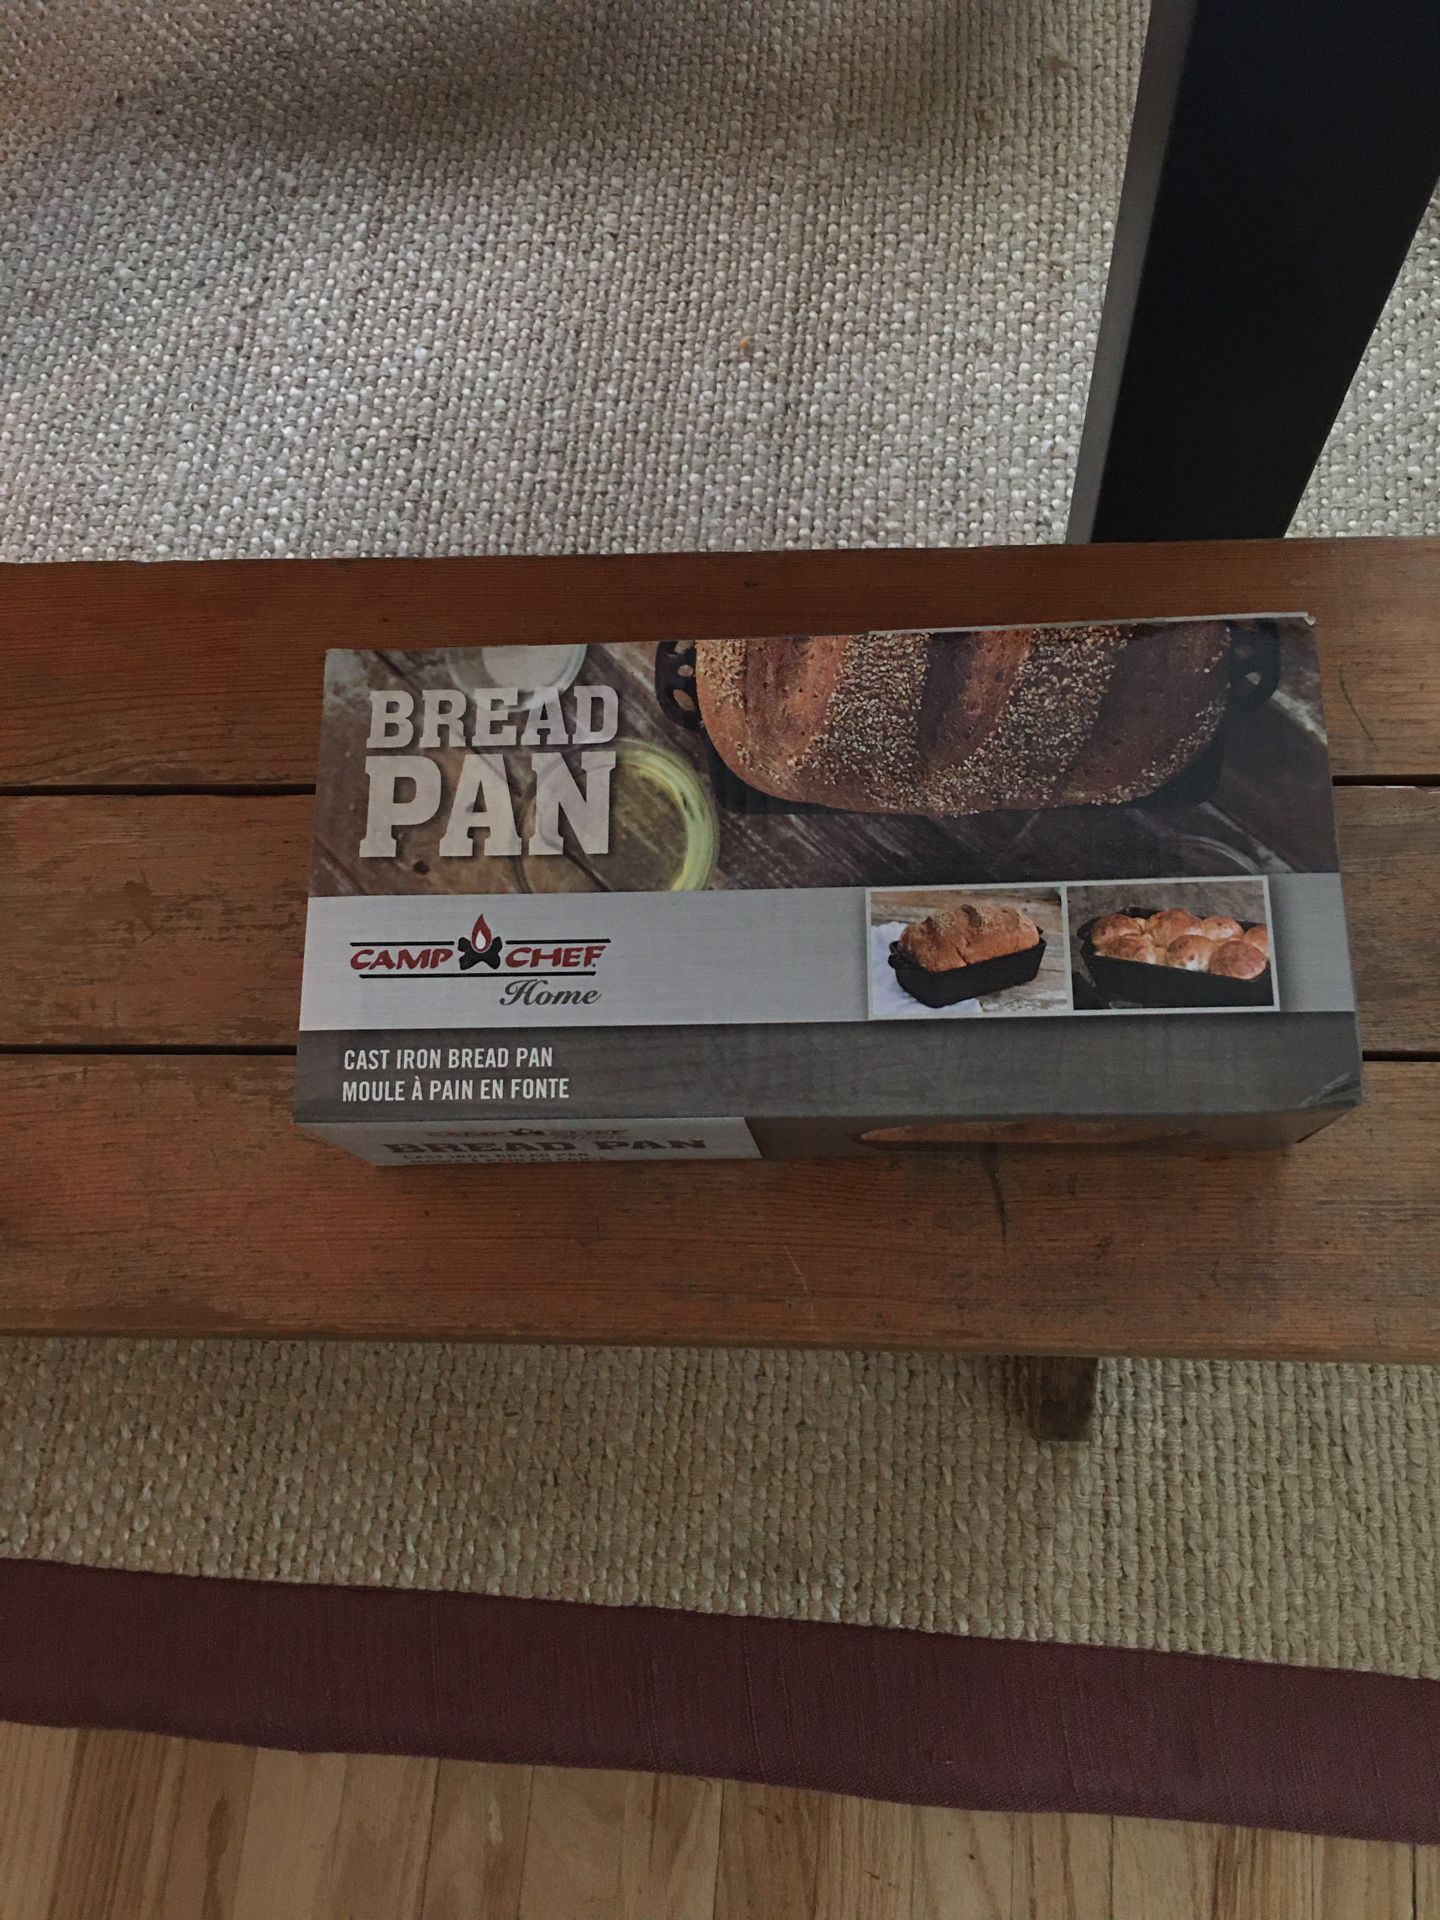 Camp chef bread pan